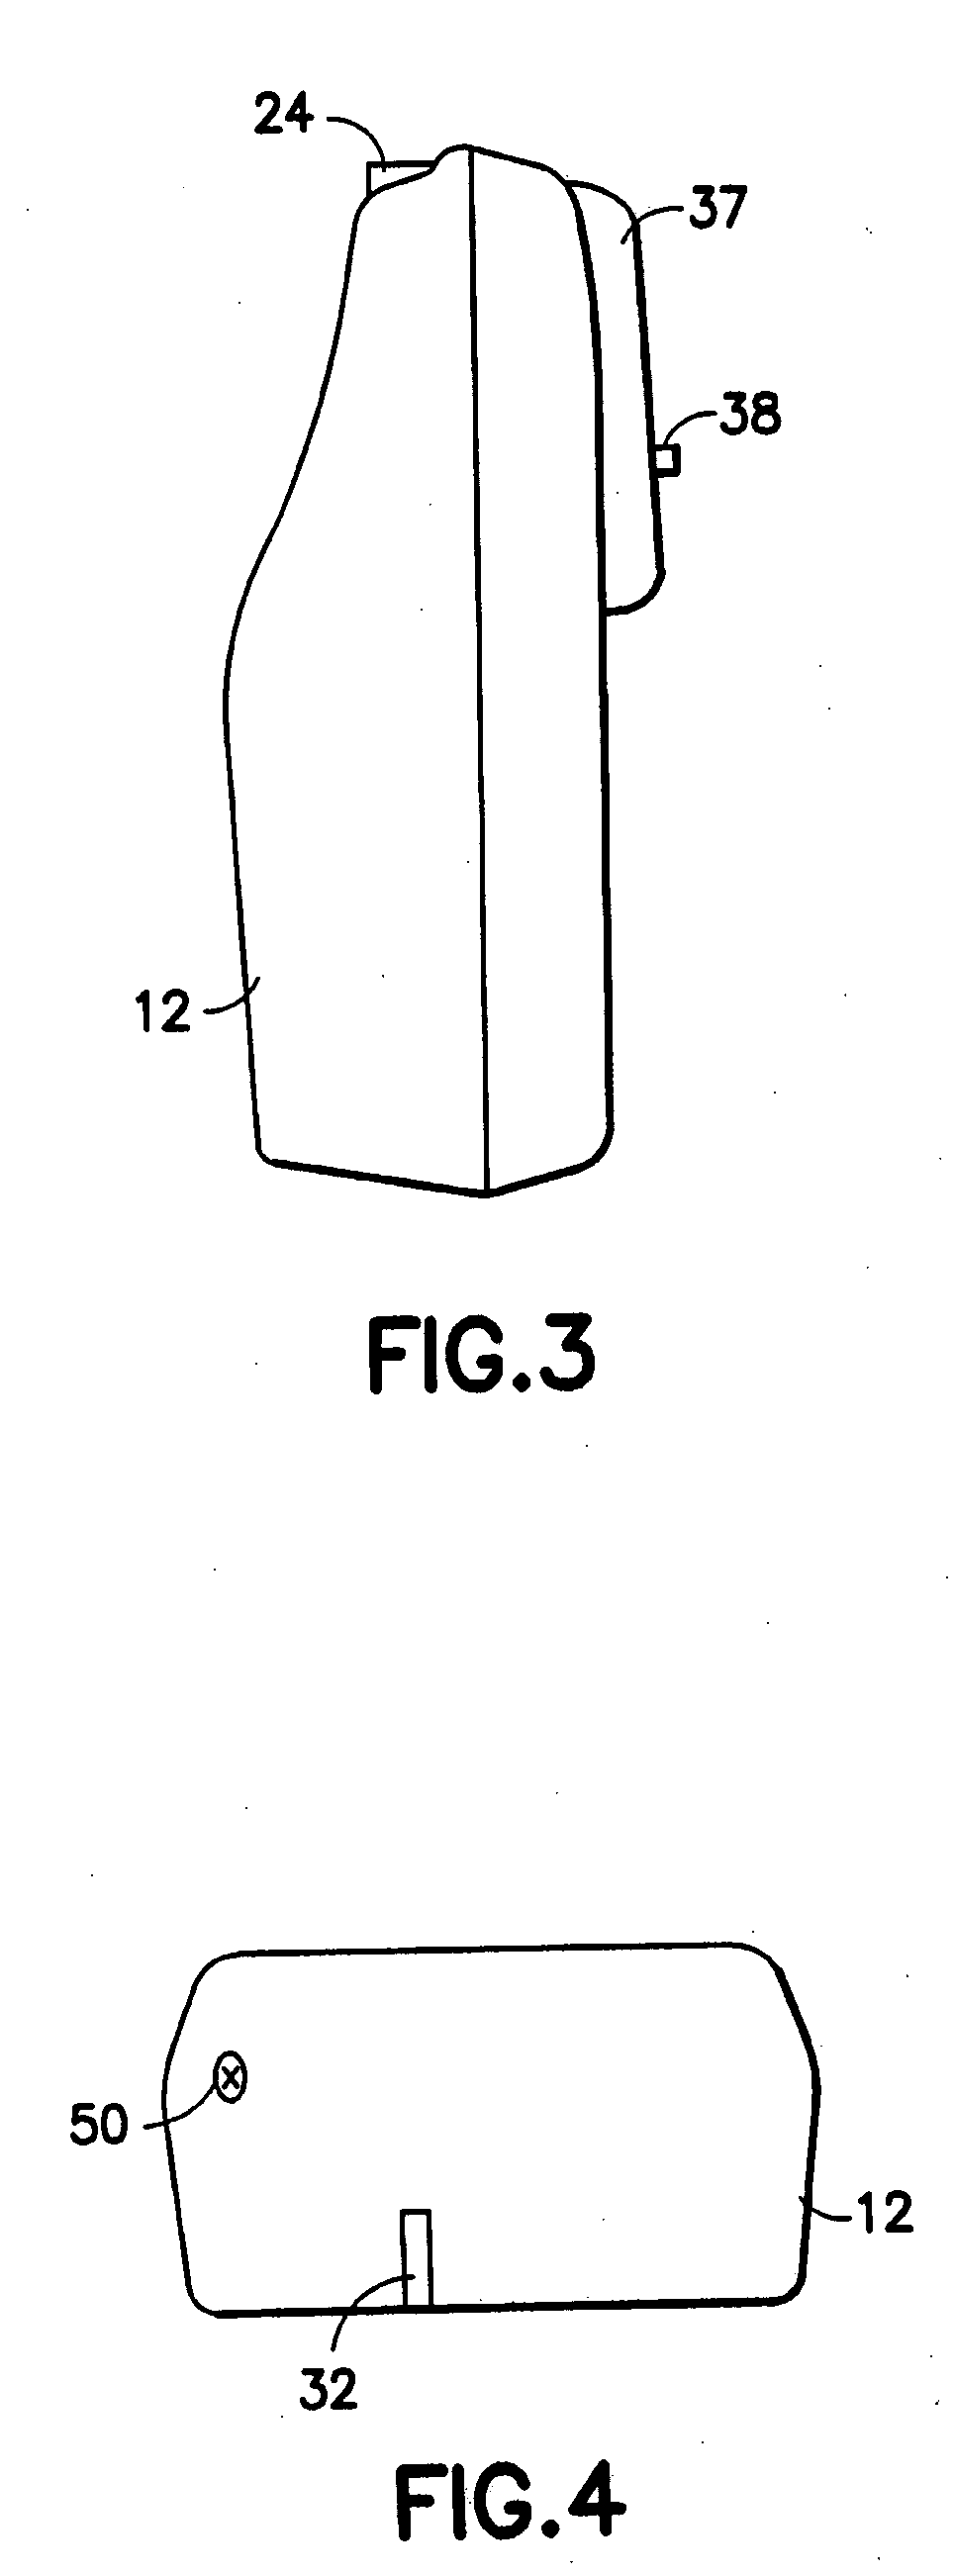 Modular adaptor assembly for personal digital appliance